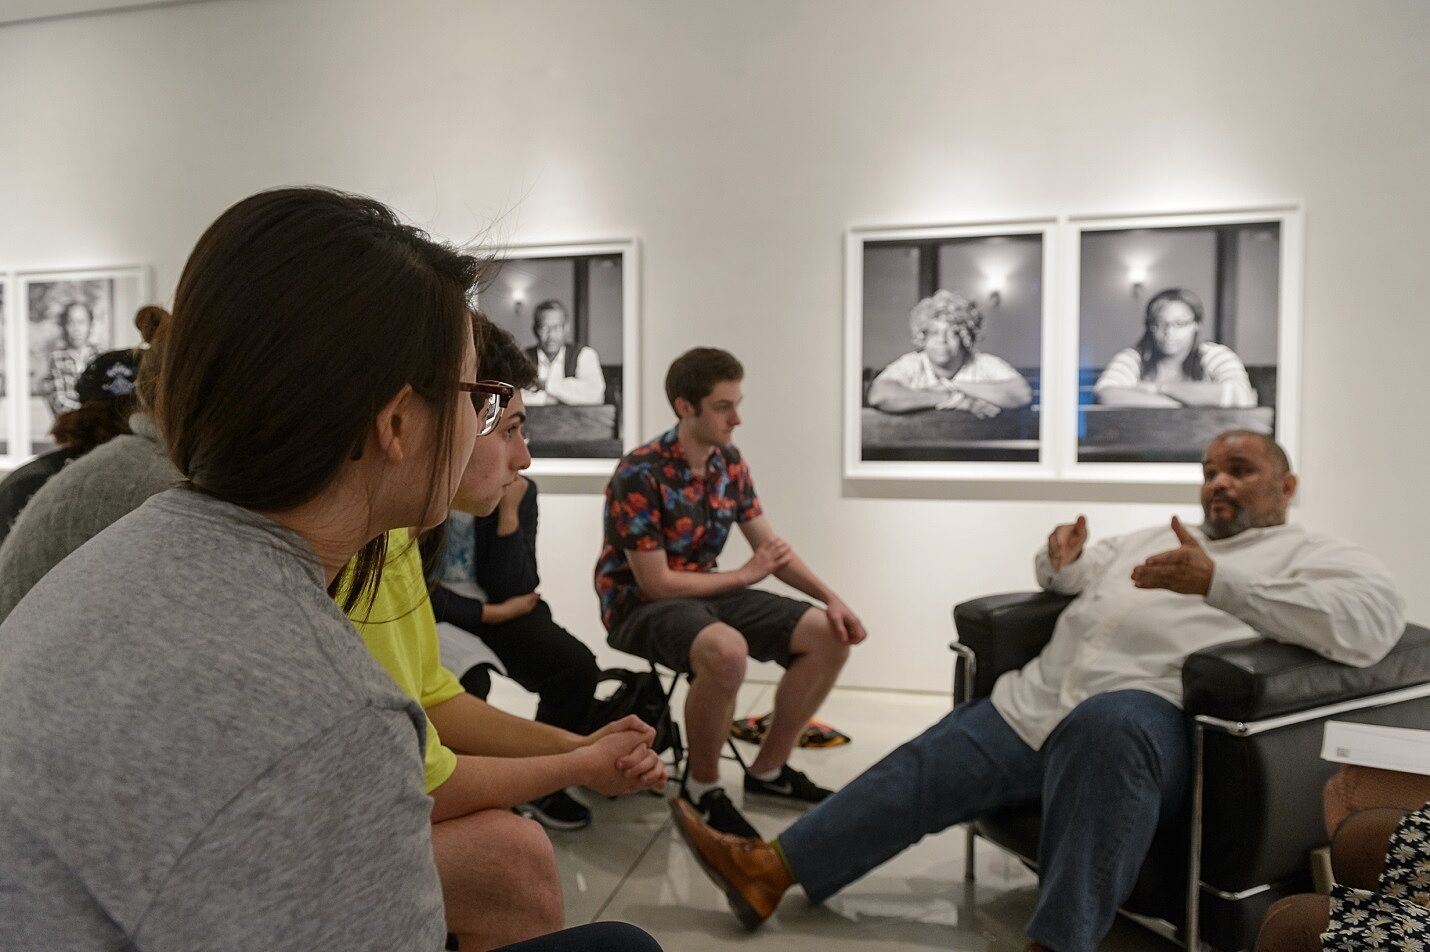 Dawoud Bey talks about his work inside the Mary Boone Gallery.